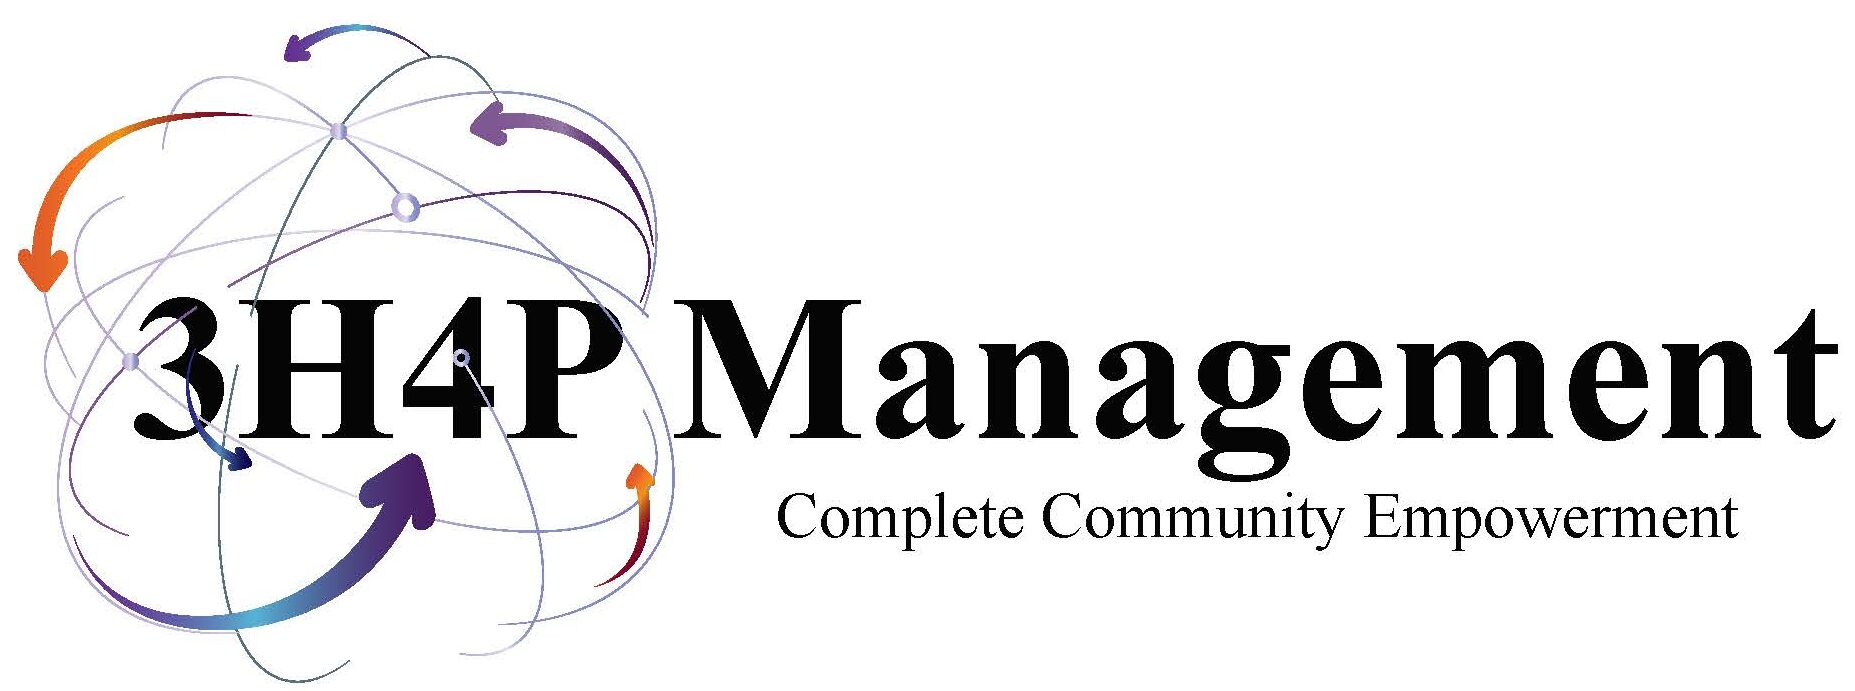 3H4P Management & Consulting Services